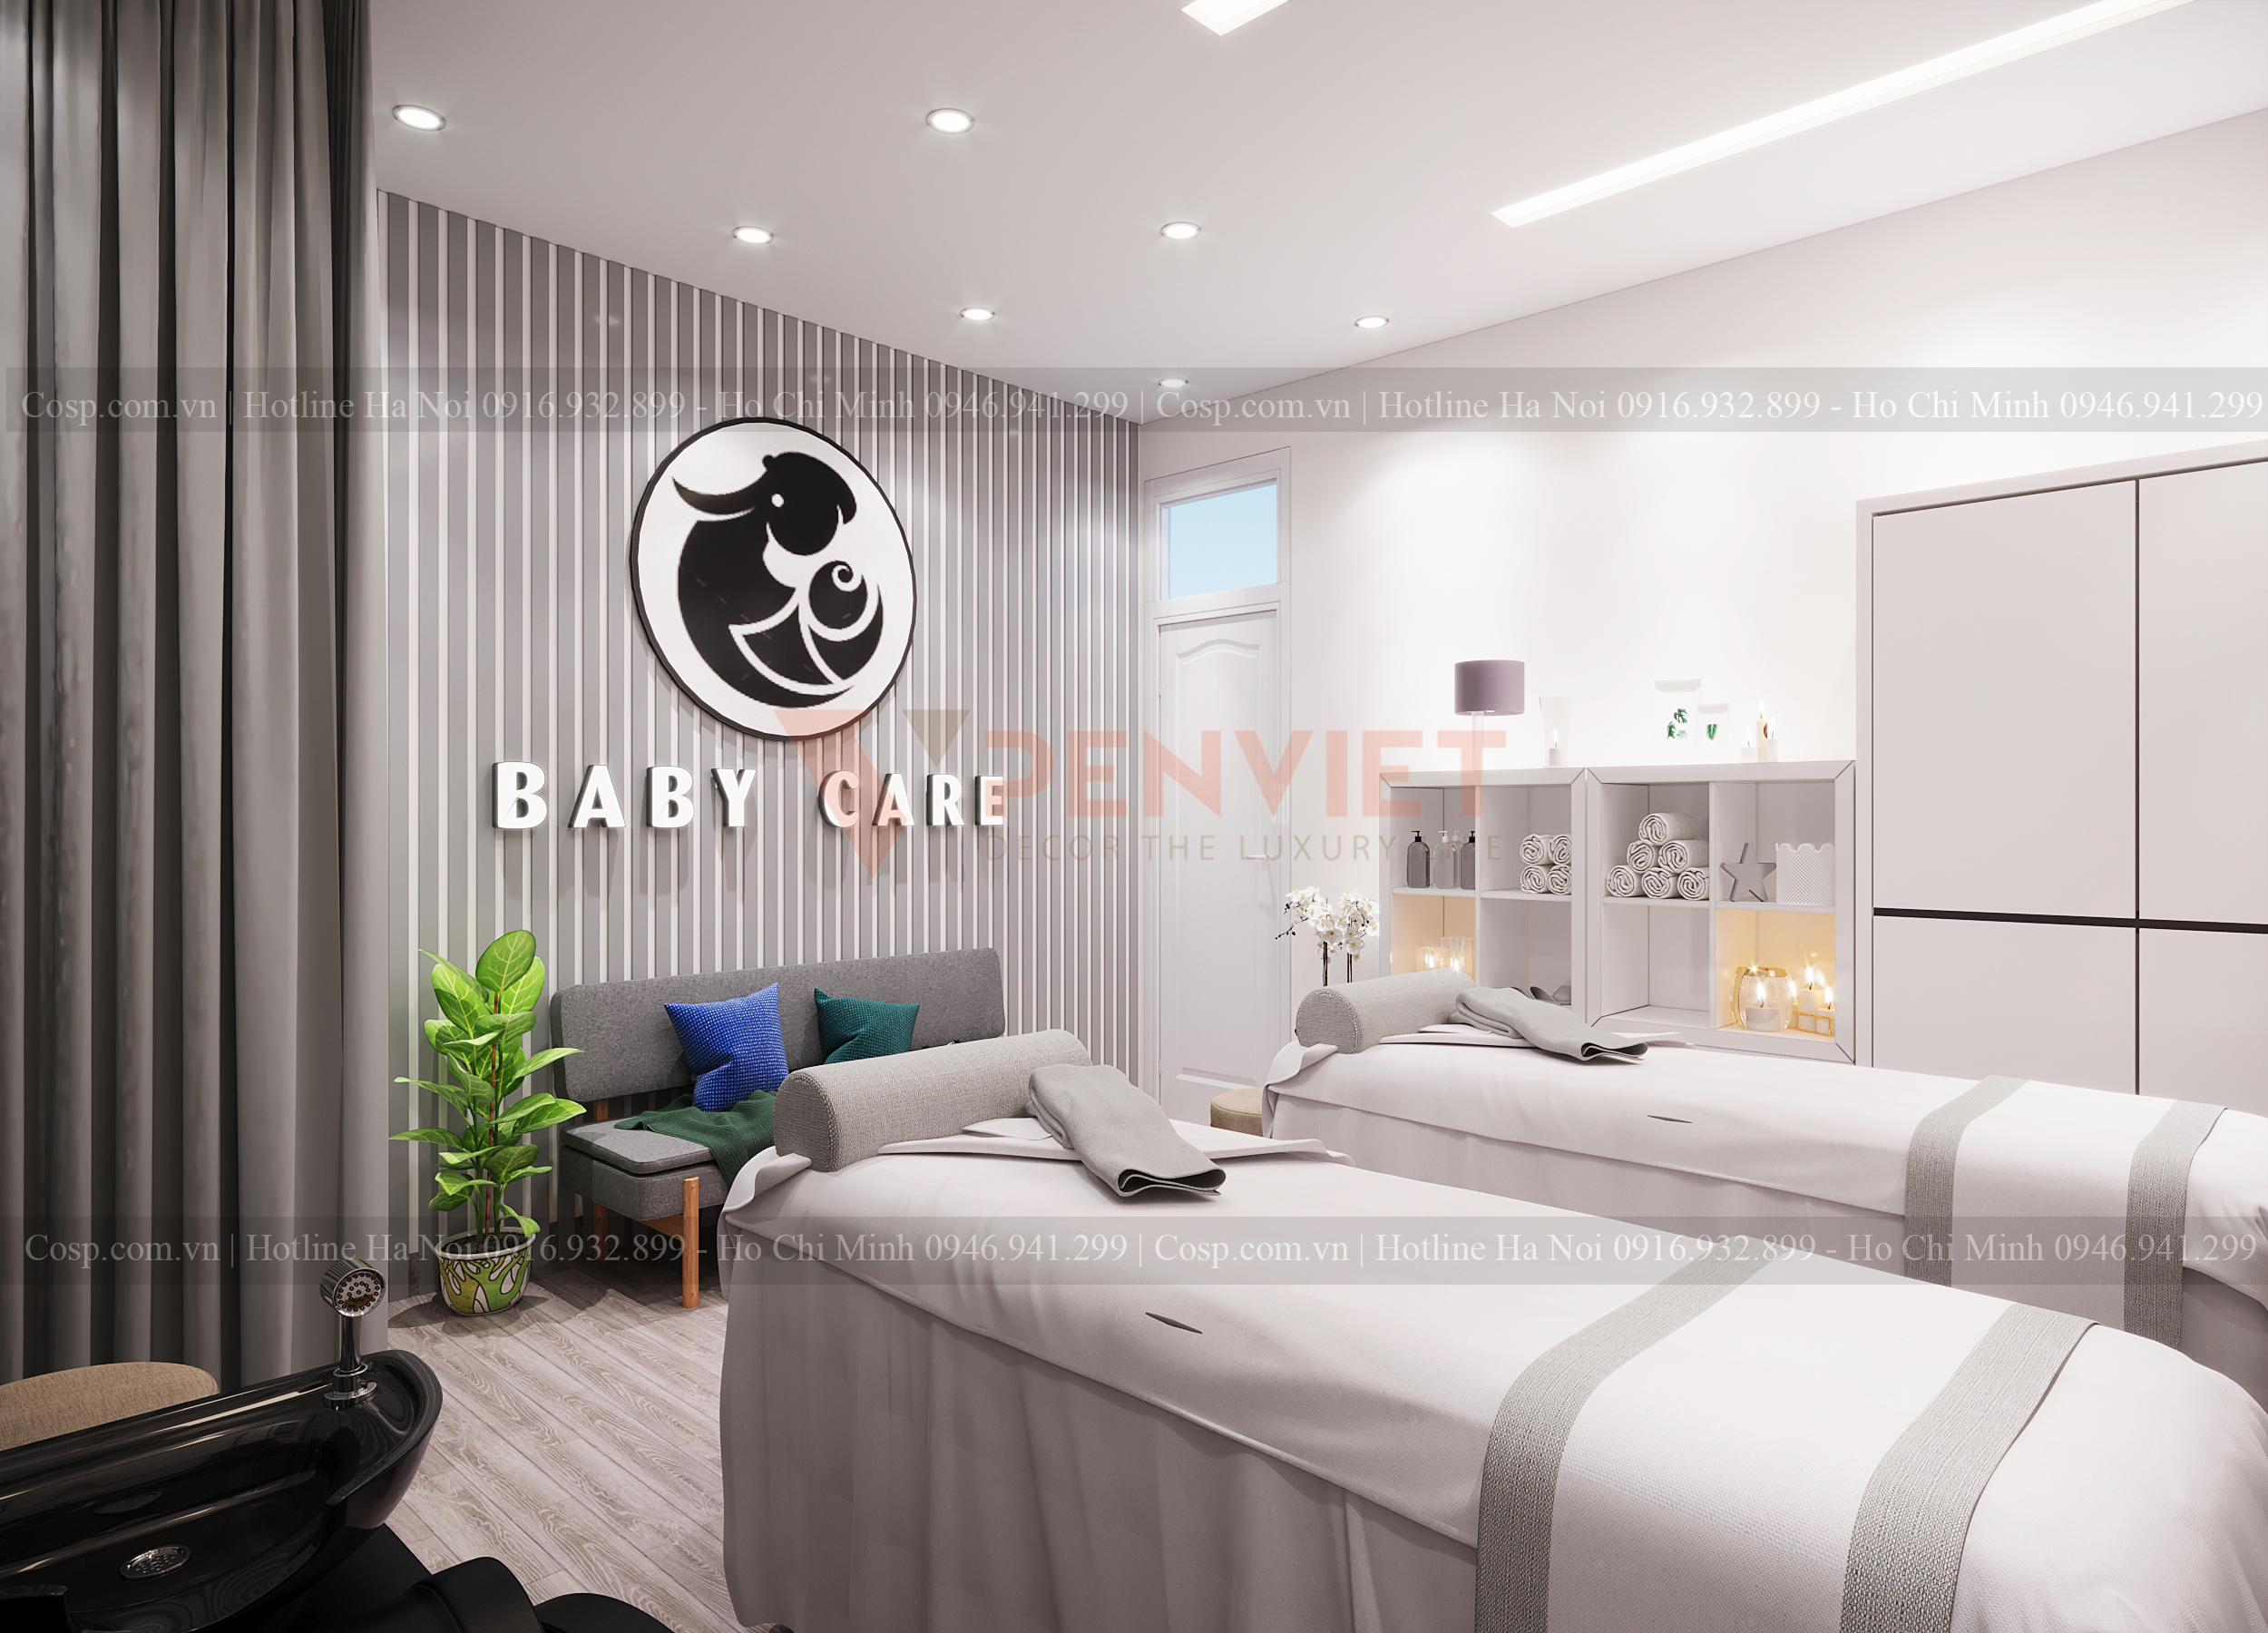 Thiết kế spa mini Baby Care